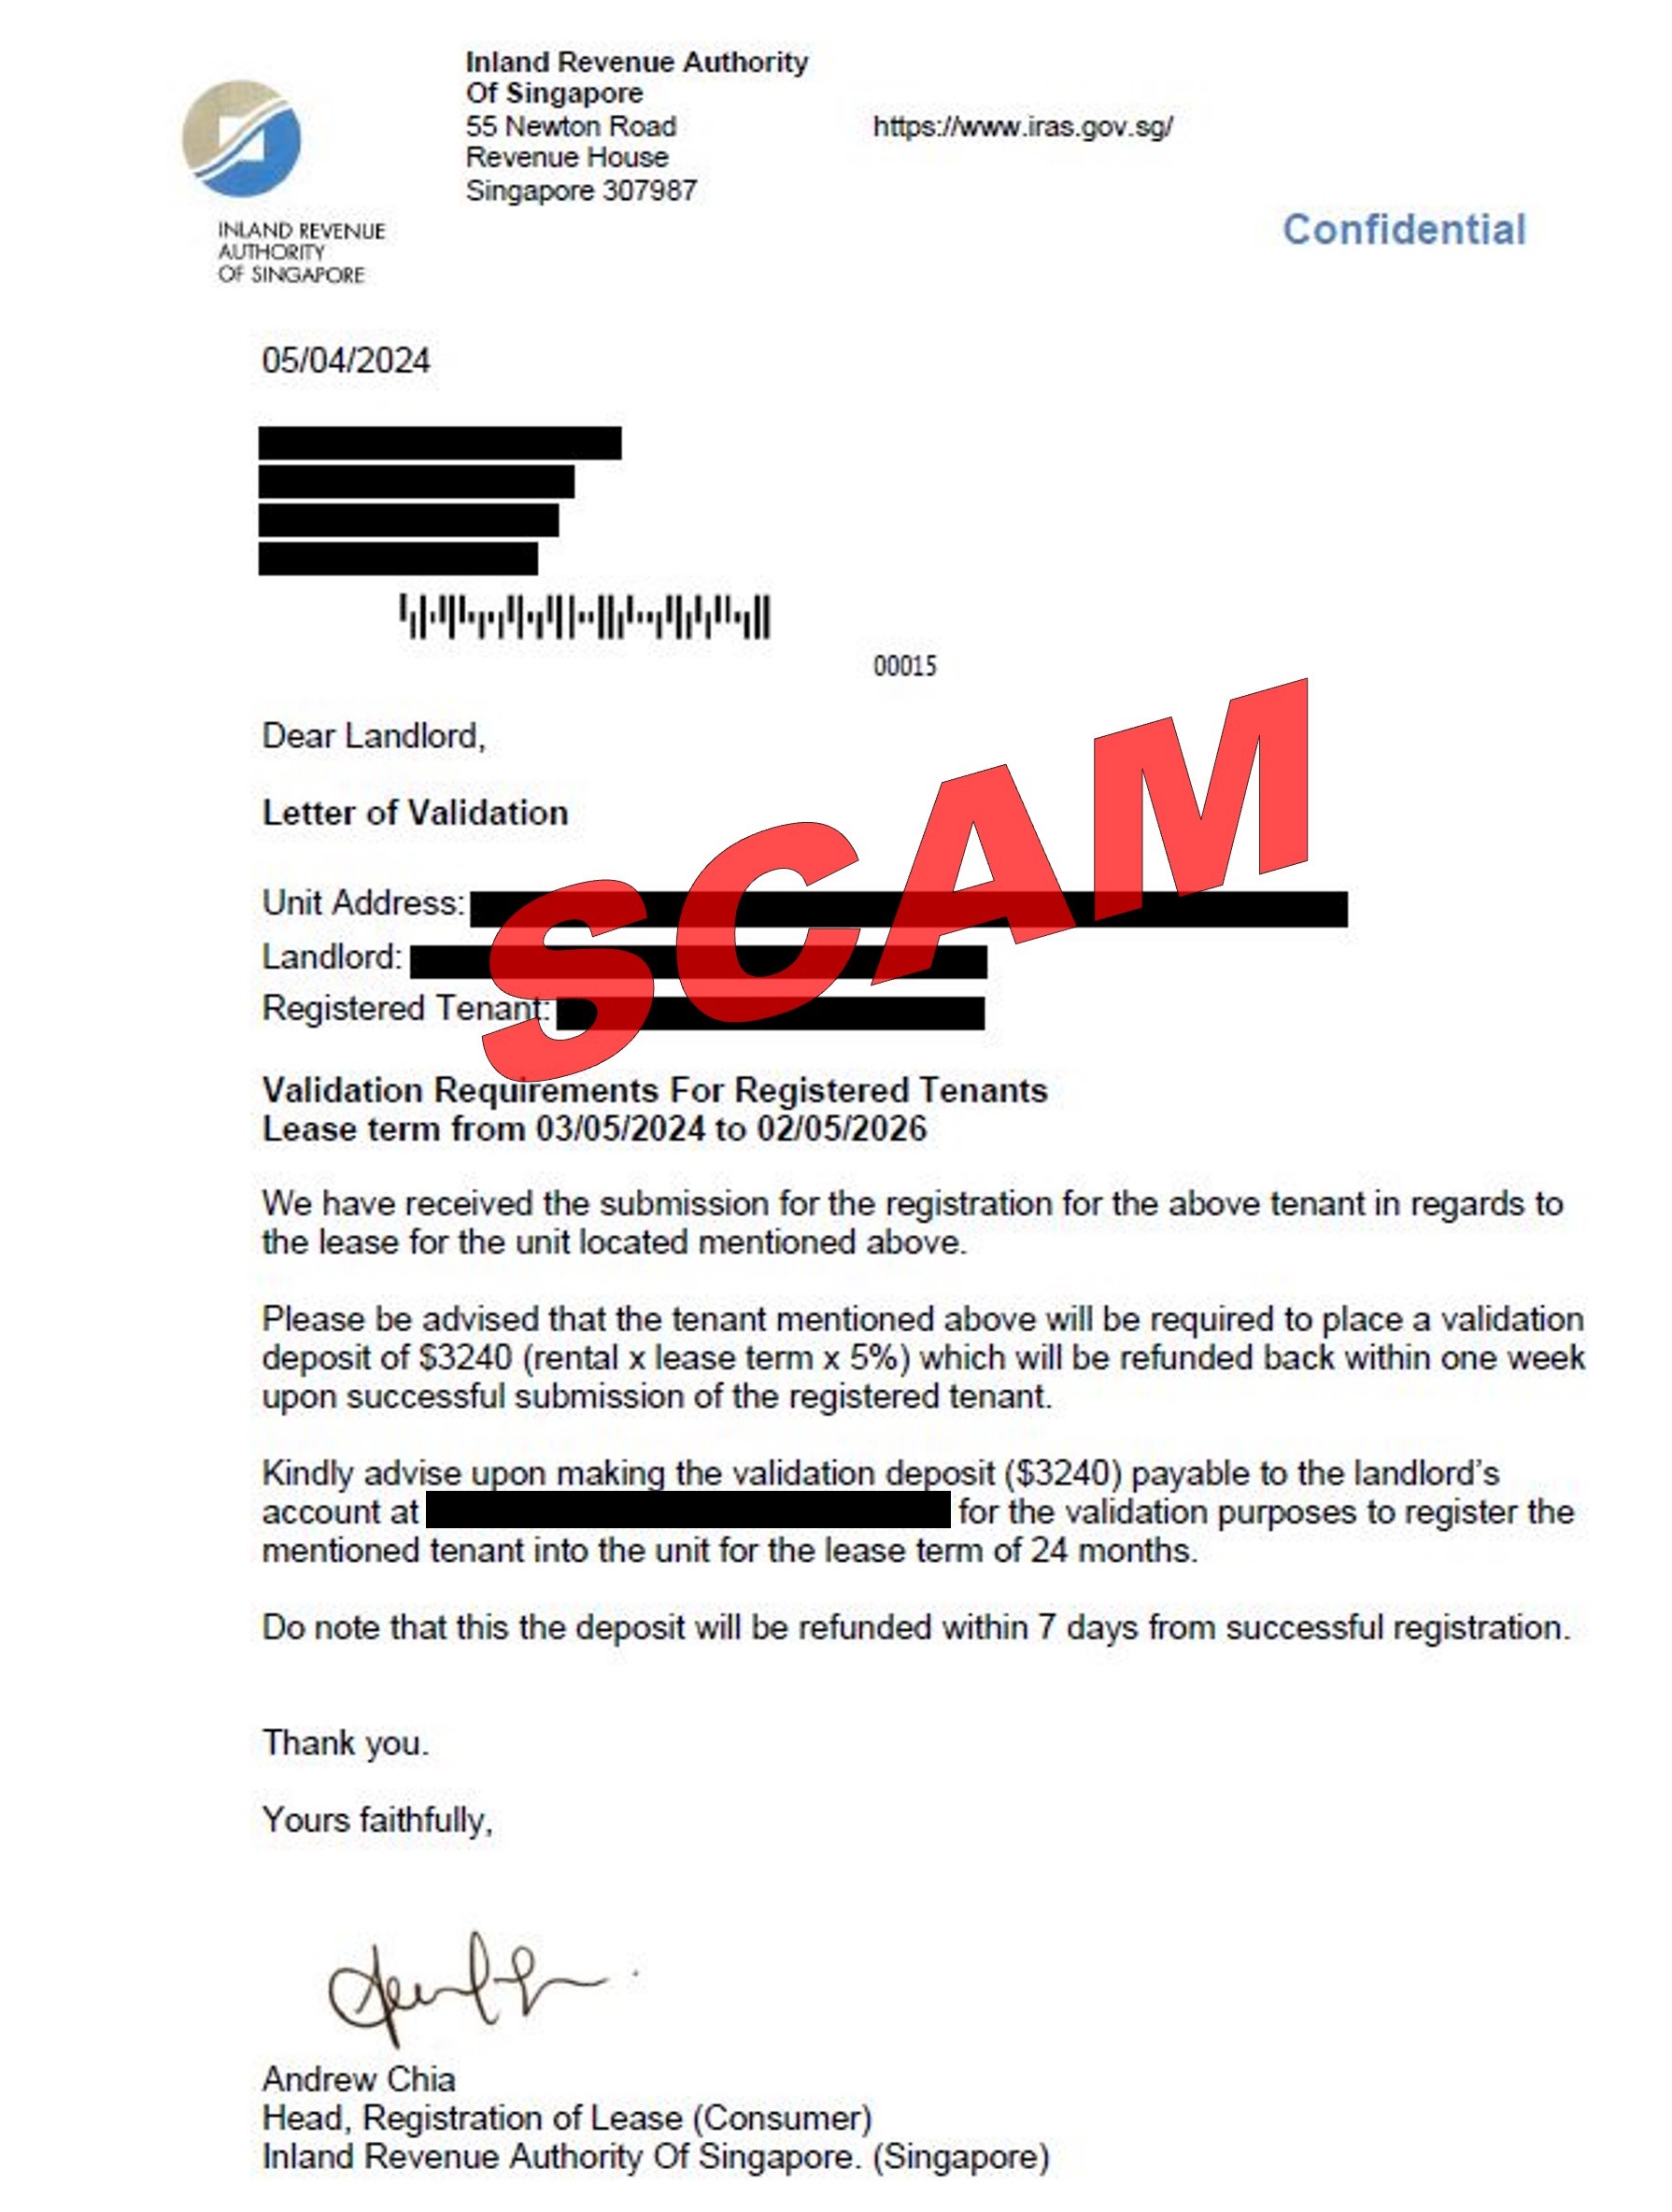 Screenshot of scam email on payment of validation deposit_5Apr2024